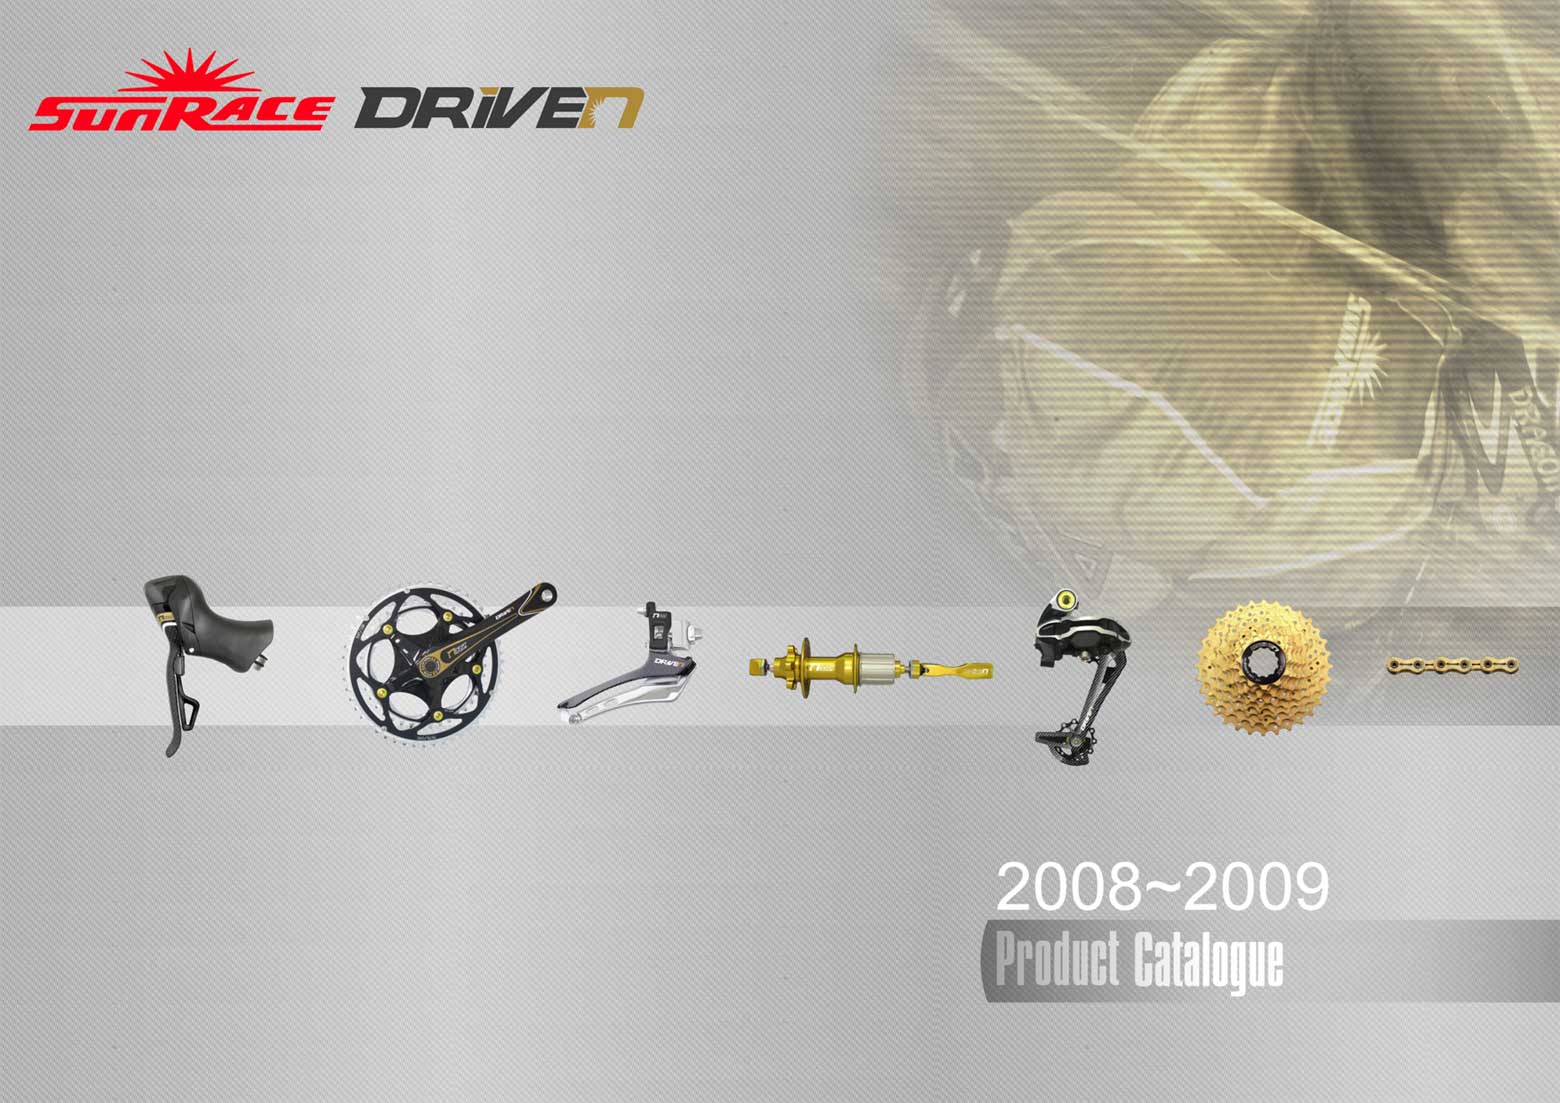 SunRace Product Catalogue 2008-2009 front cover main image